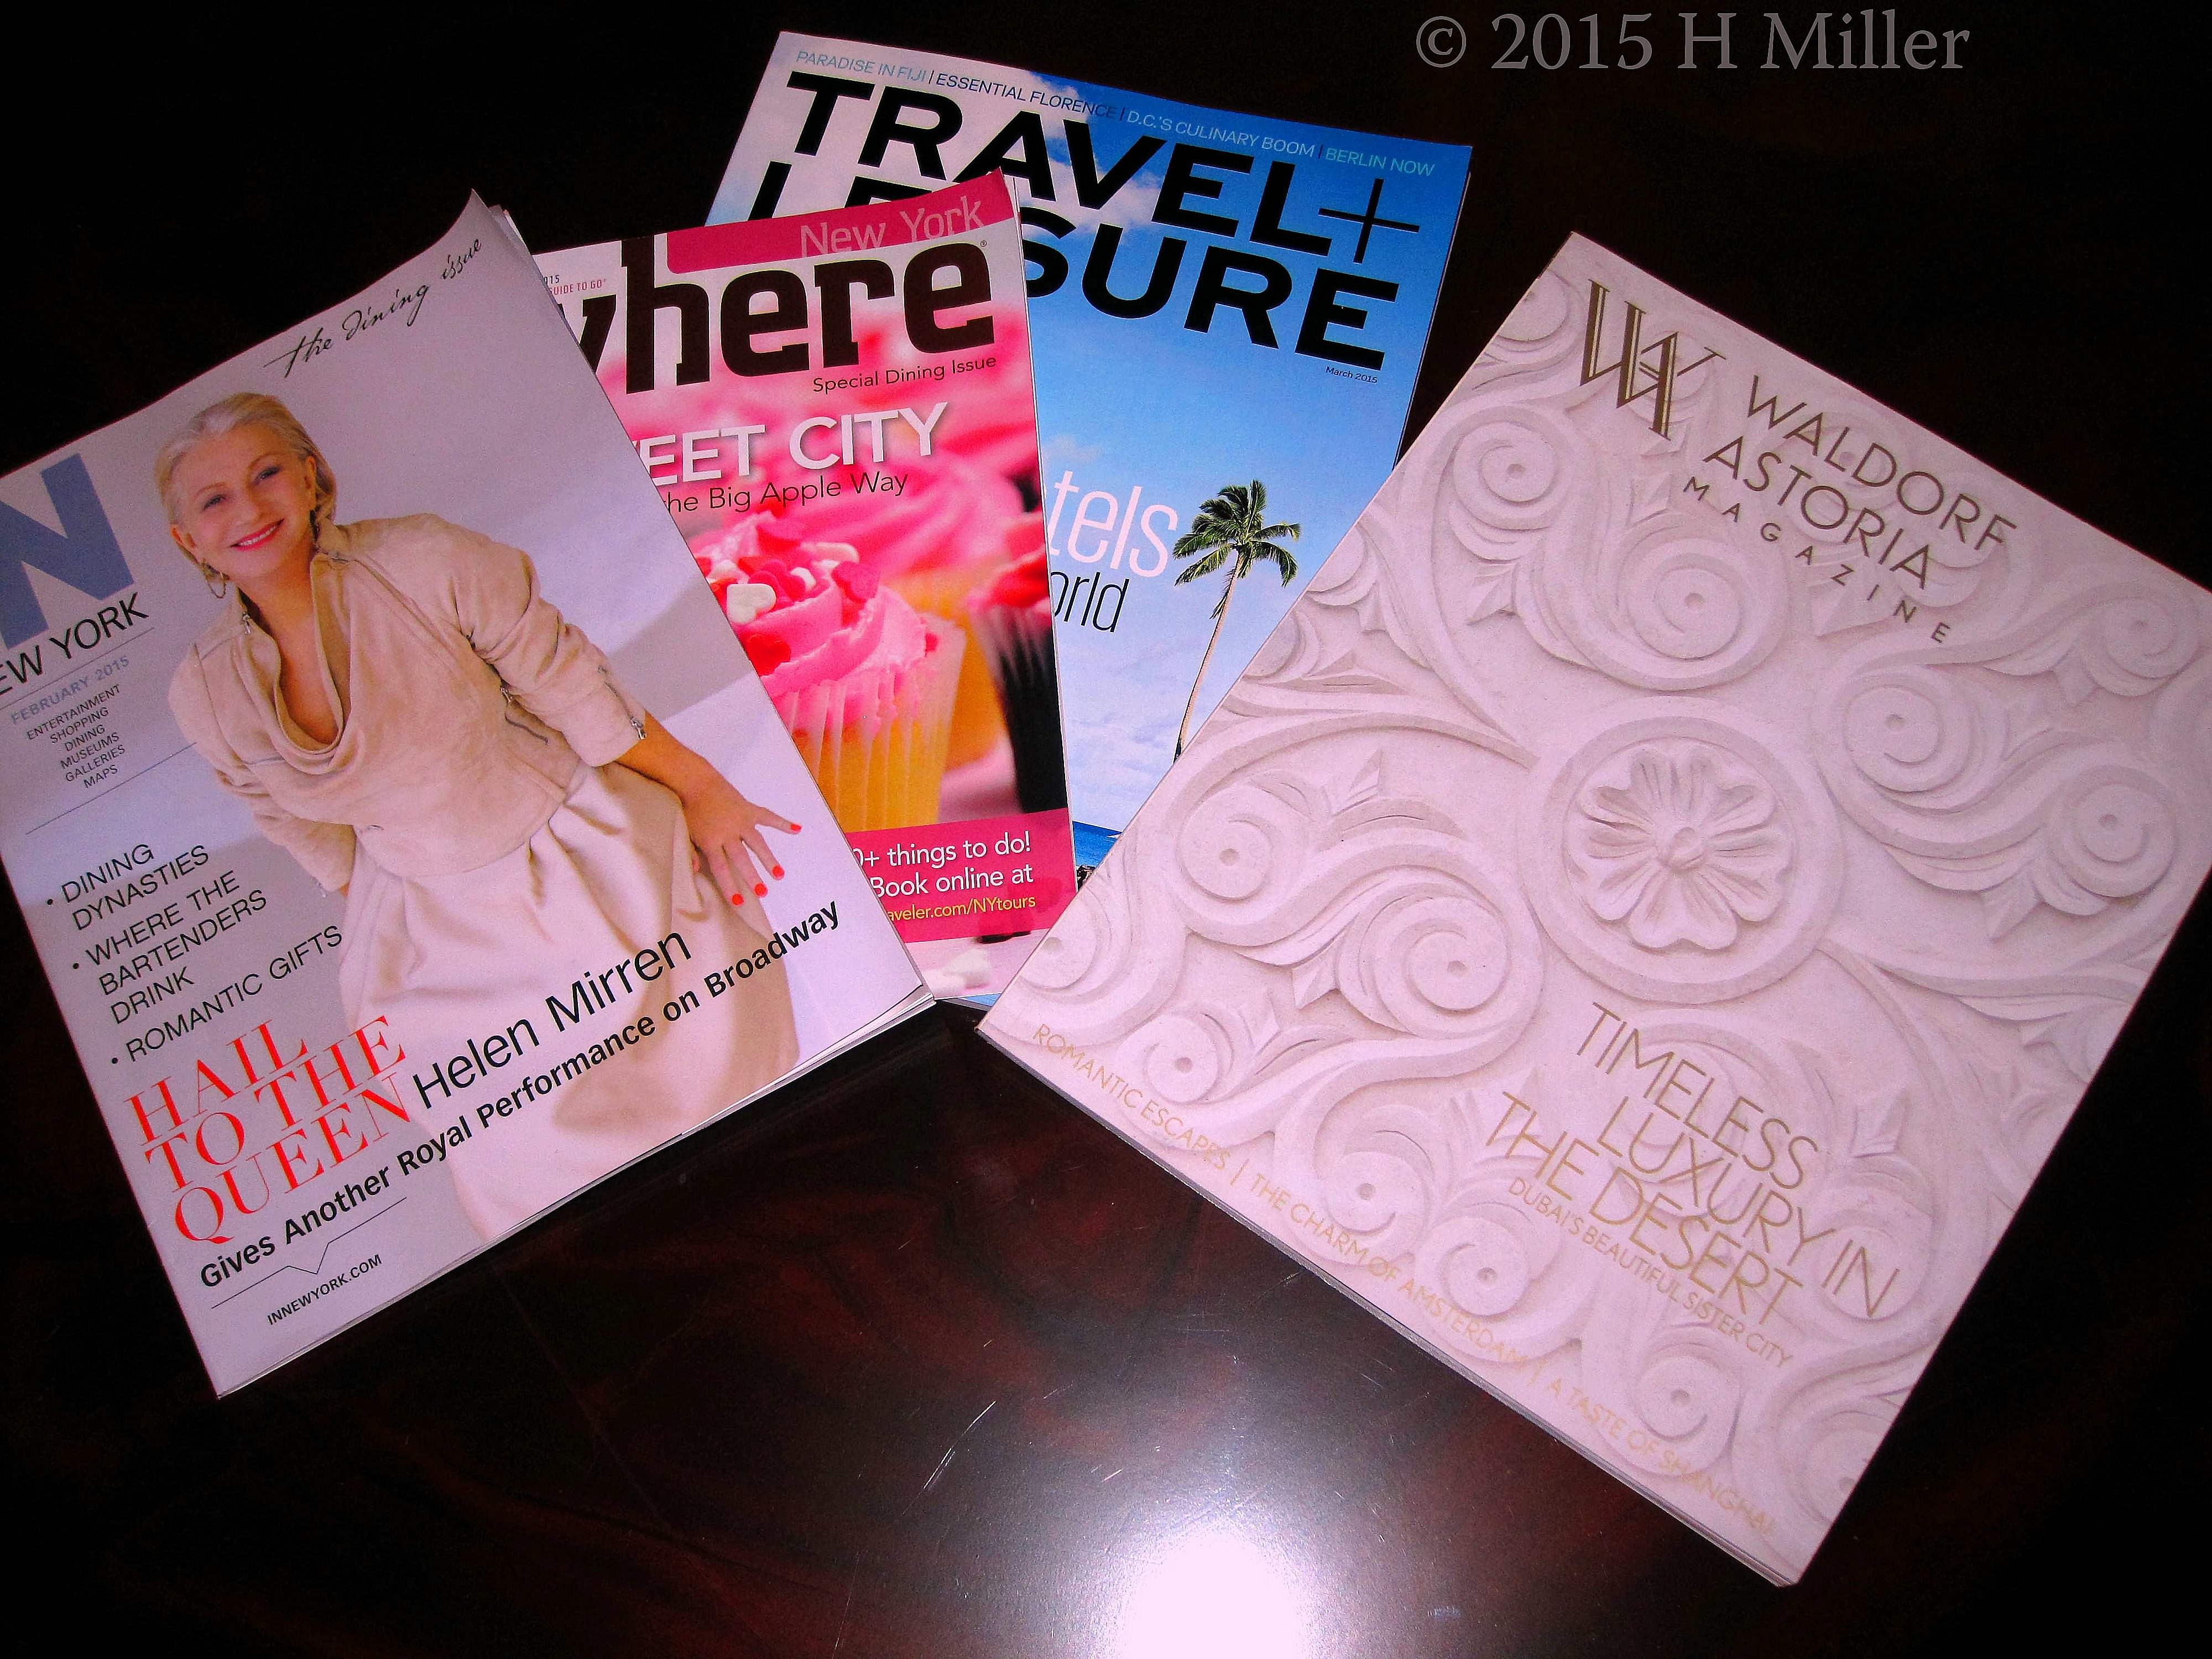 Coffeetable Magazines That Were Already At The Waldorf Astoria Hotel Suite.